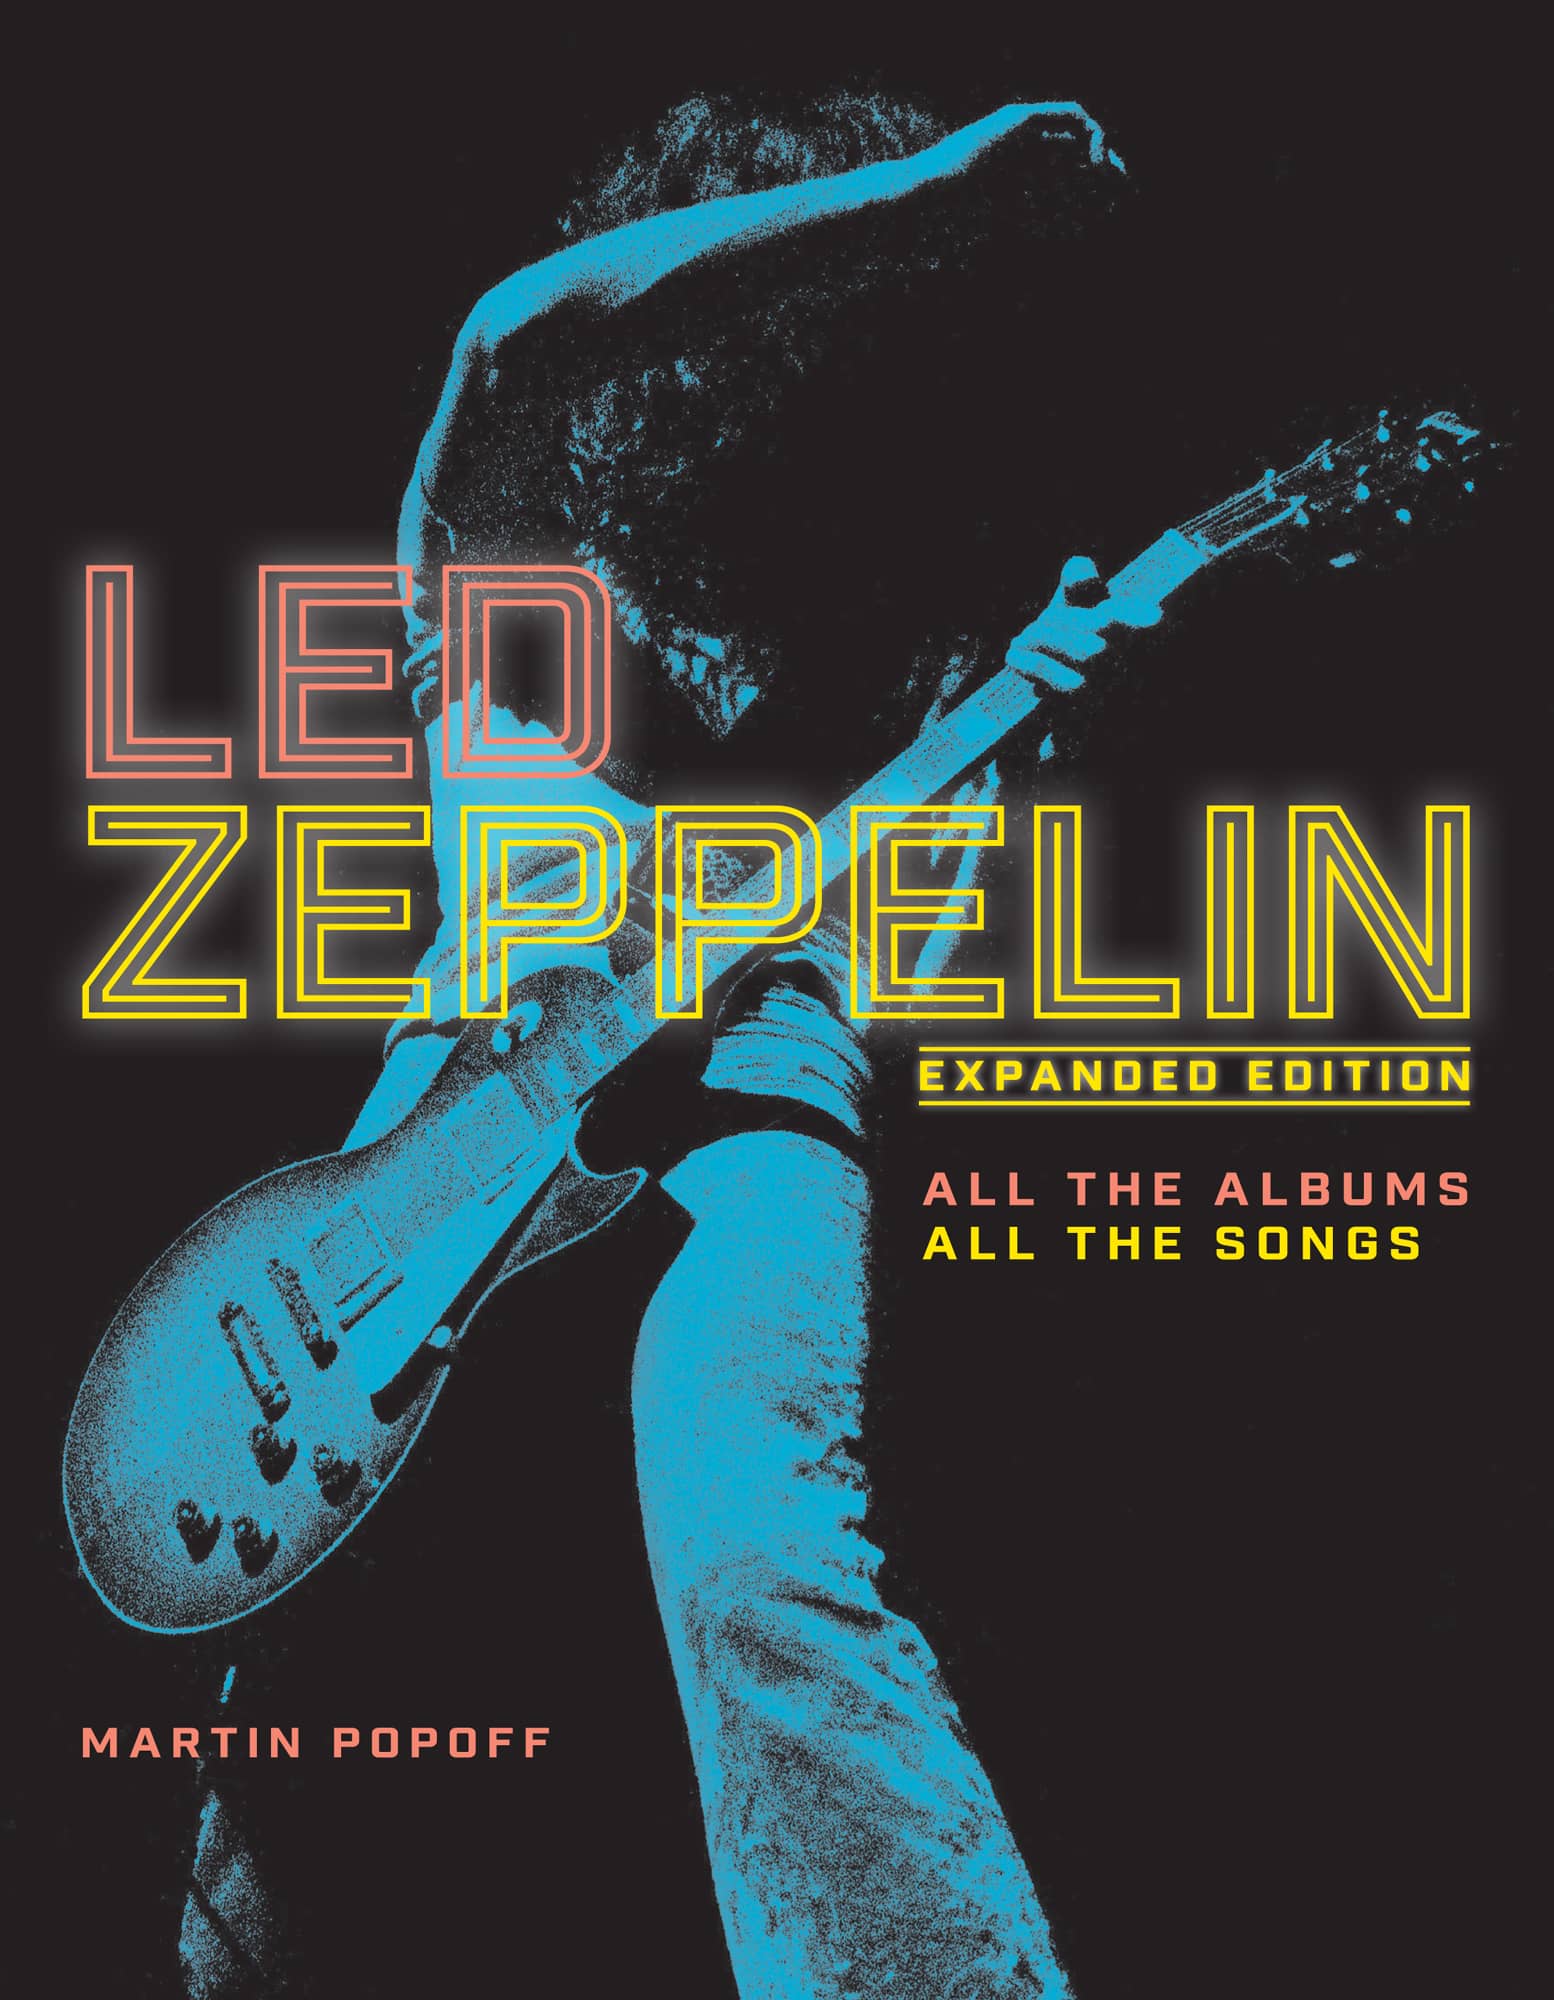 LED ZEPPELIN EXPANDED EDITION ALL THE ALBUMS ALL THE SONGS MARTIN POPOFF - photo 1